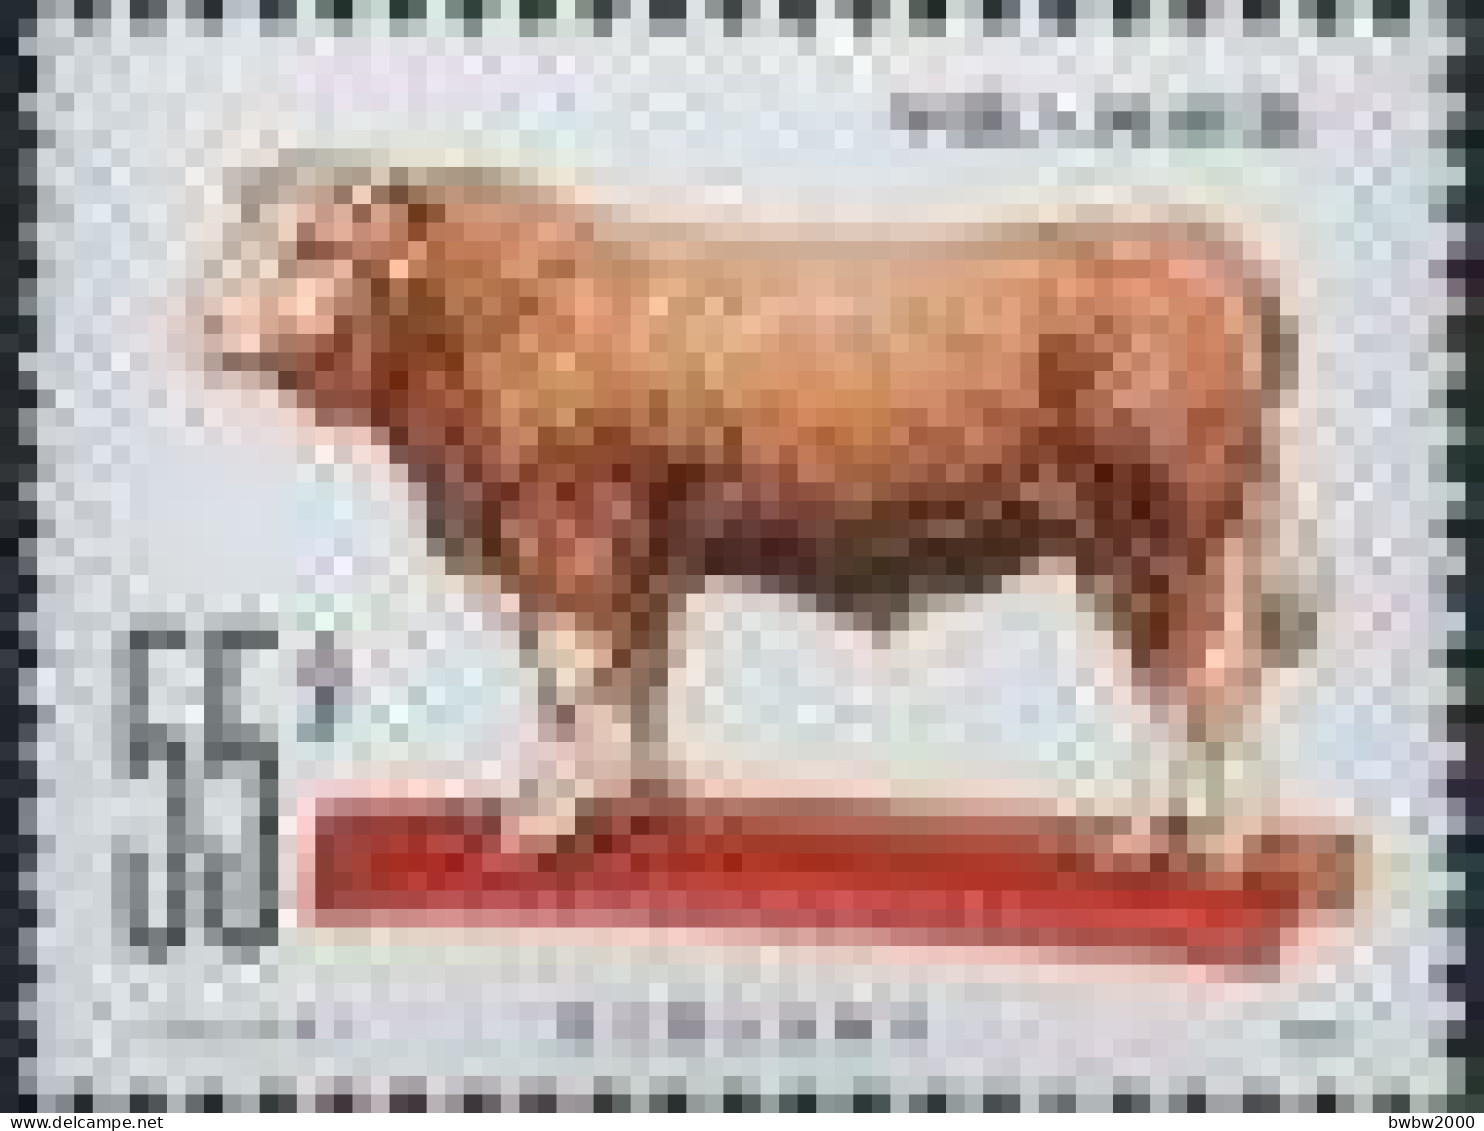 China T63, Animal Husbandry : Cattle(6-6) Simmental Cattle《畜牧业 — 牛》（6-6）西门塔尔杂种牛 - Unused Stamps